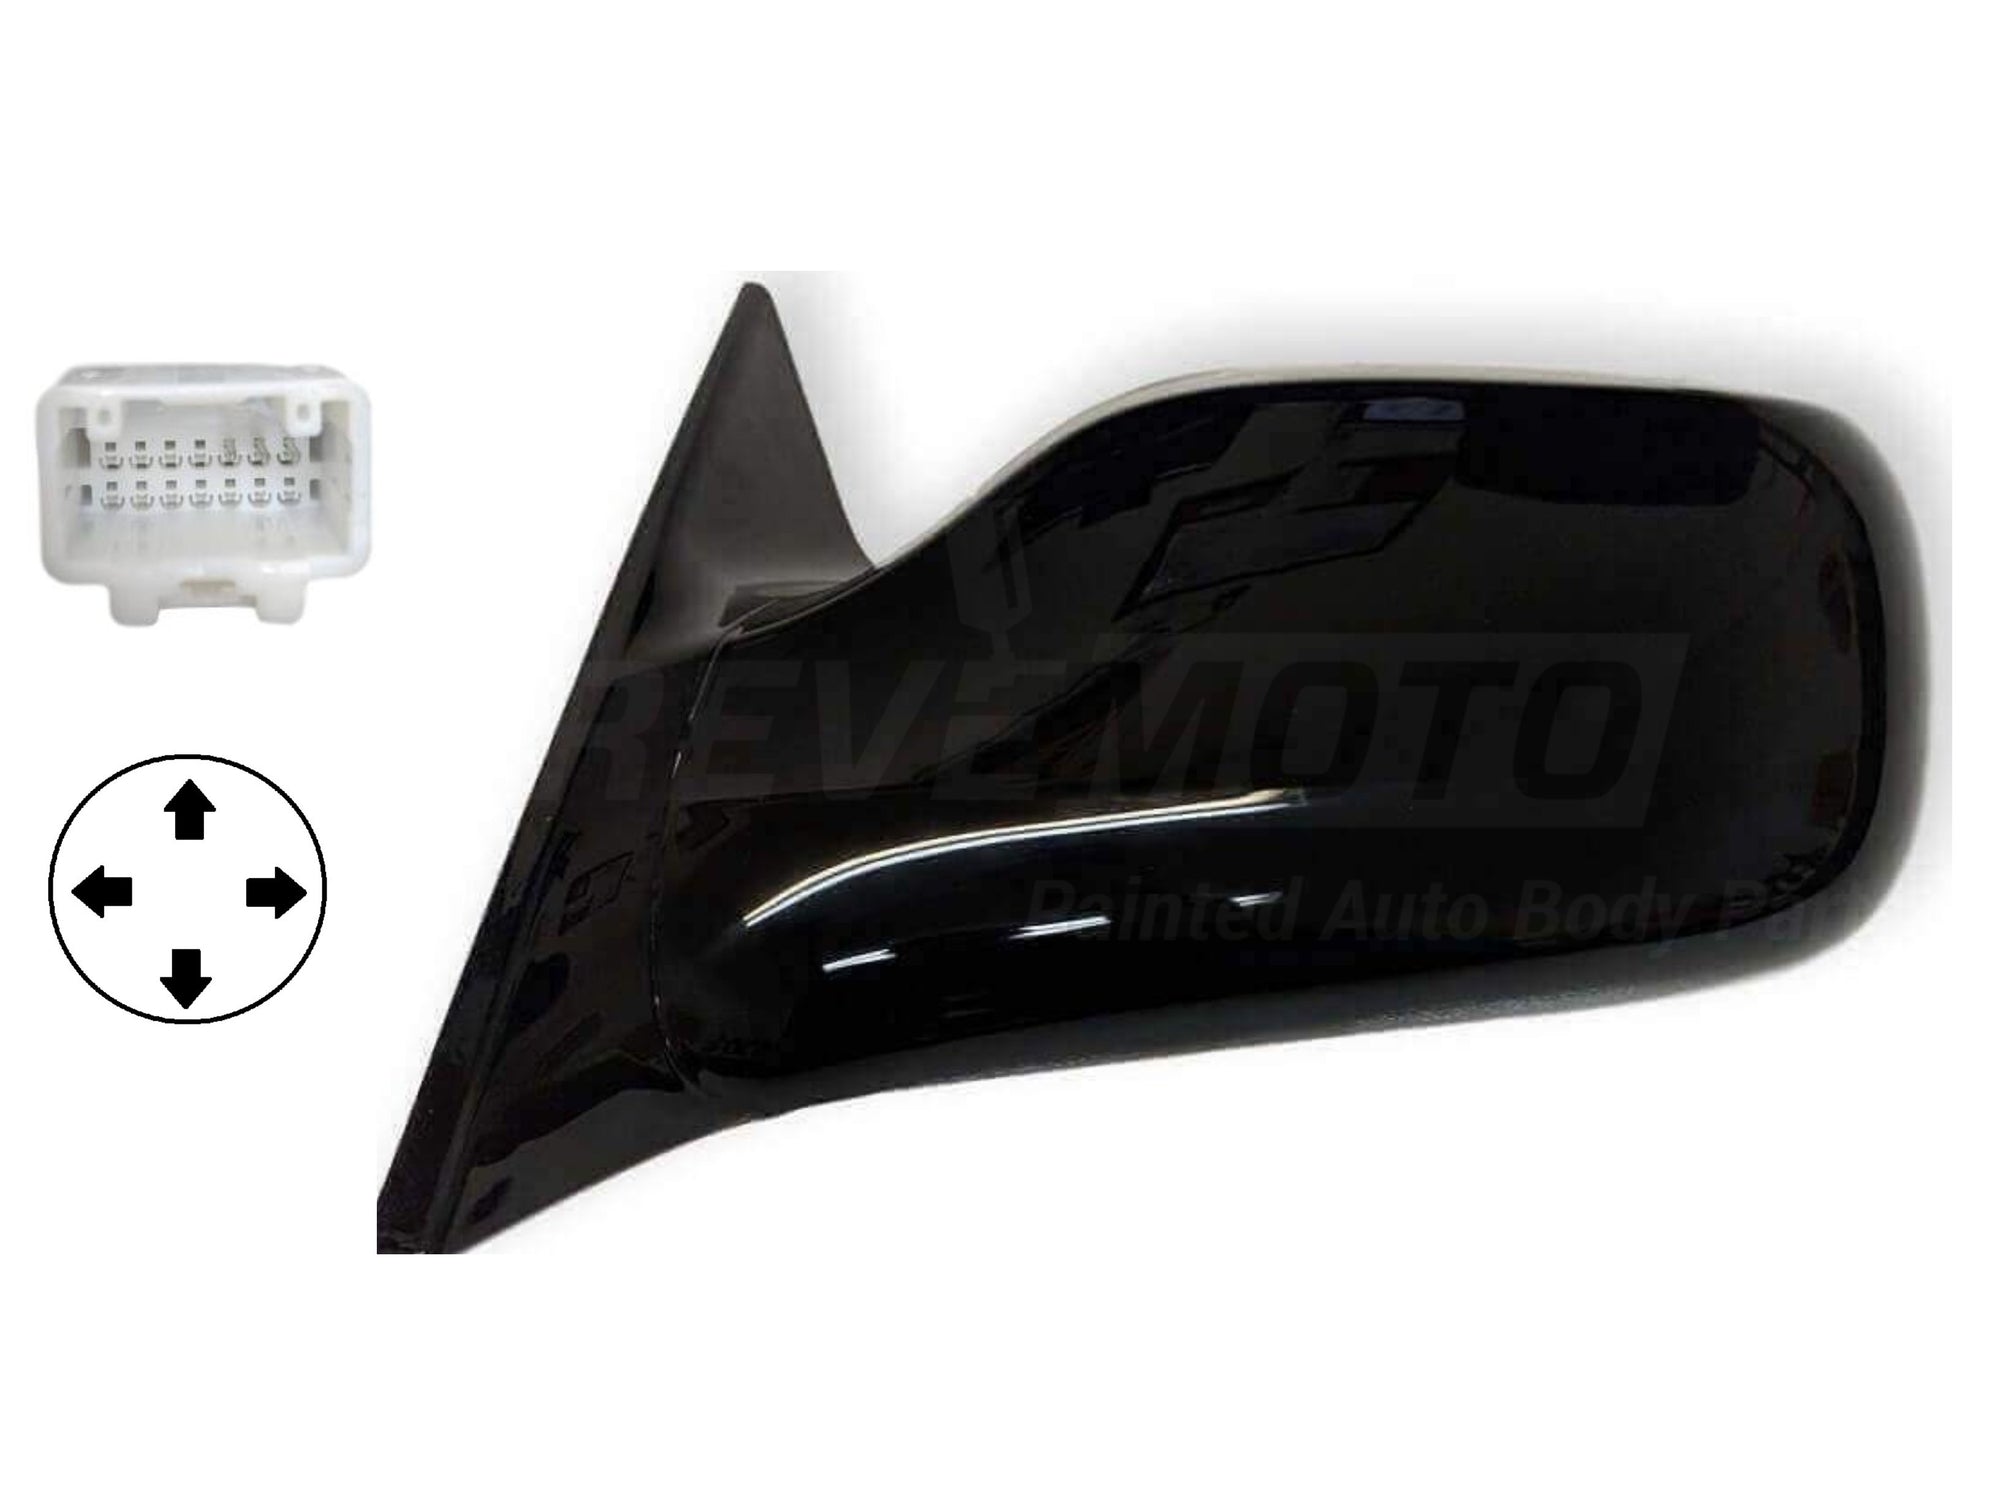 2008 Toyota Avalon Driver Side View Mirror Touring XL Exclude Limited Power Non-Heated wo Navigation System 3Pin Connector Painted Black 202 87940AC060C0 2 d610a7f1-815d-4733-9c8a-e17.jpg?v=1592978267